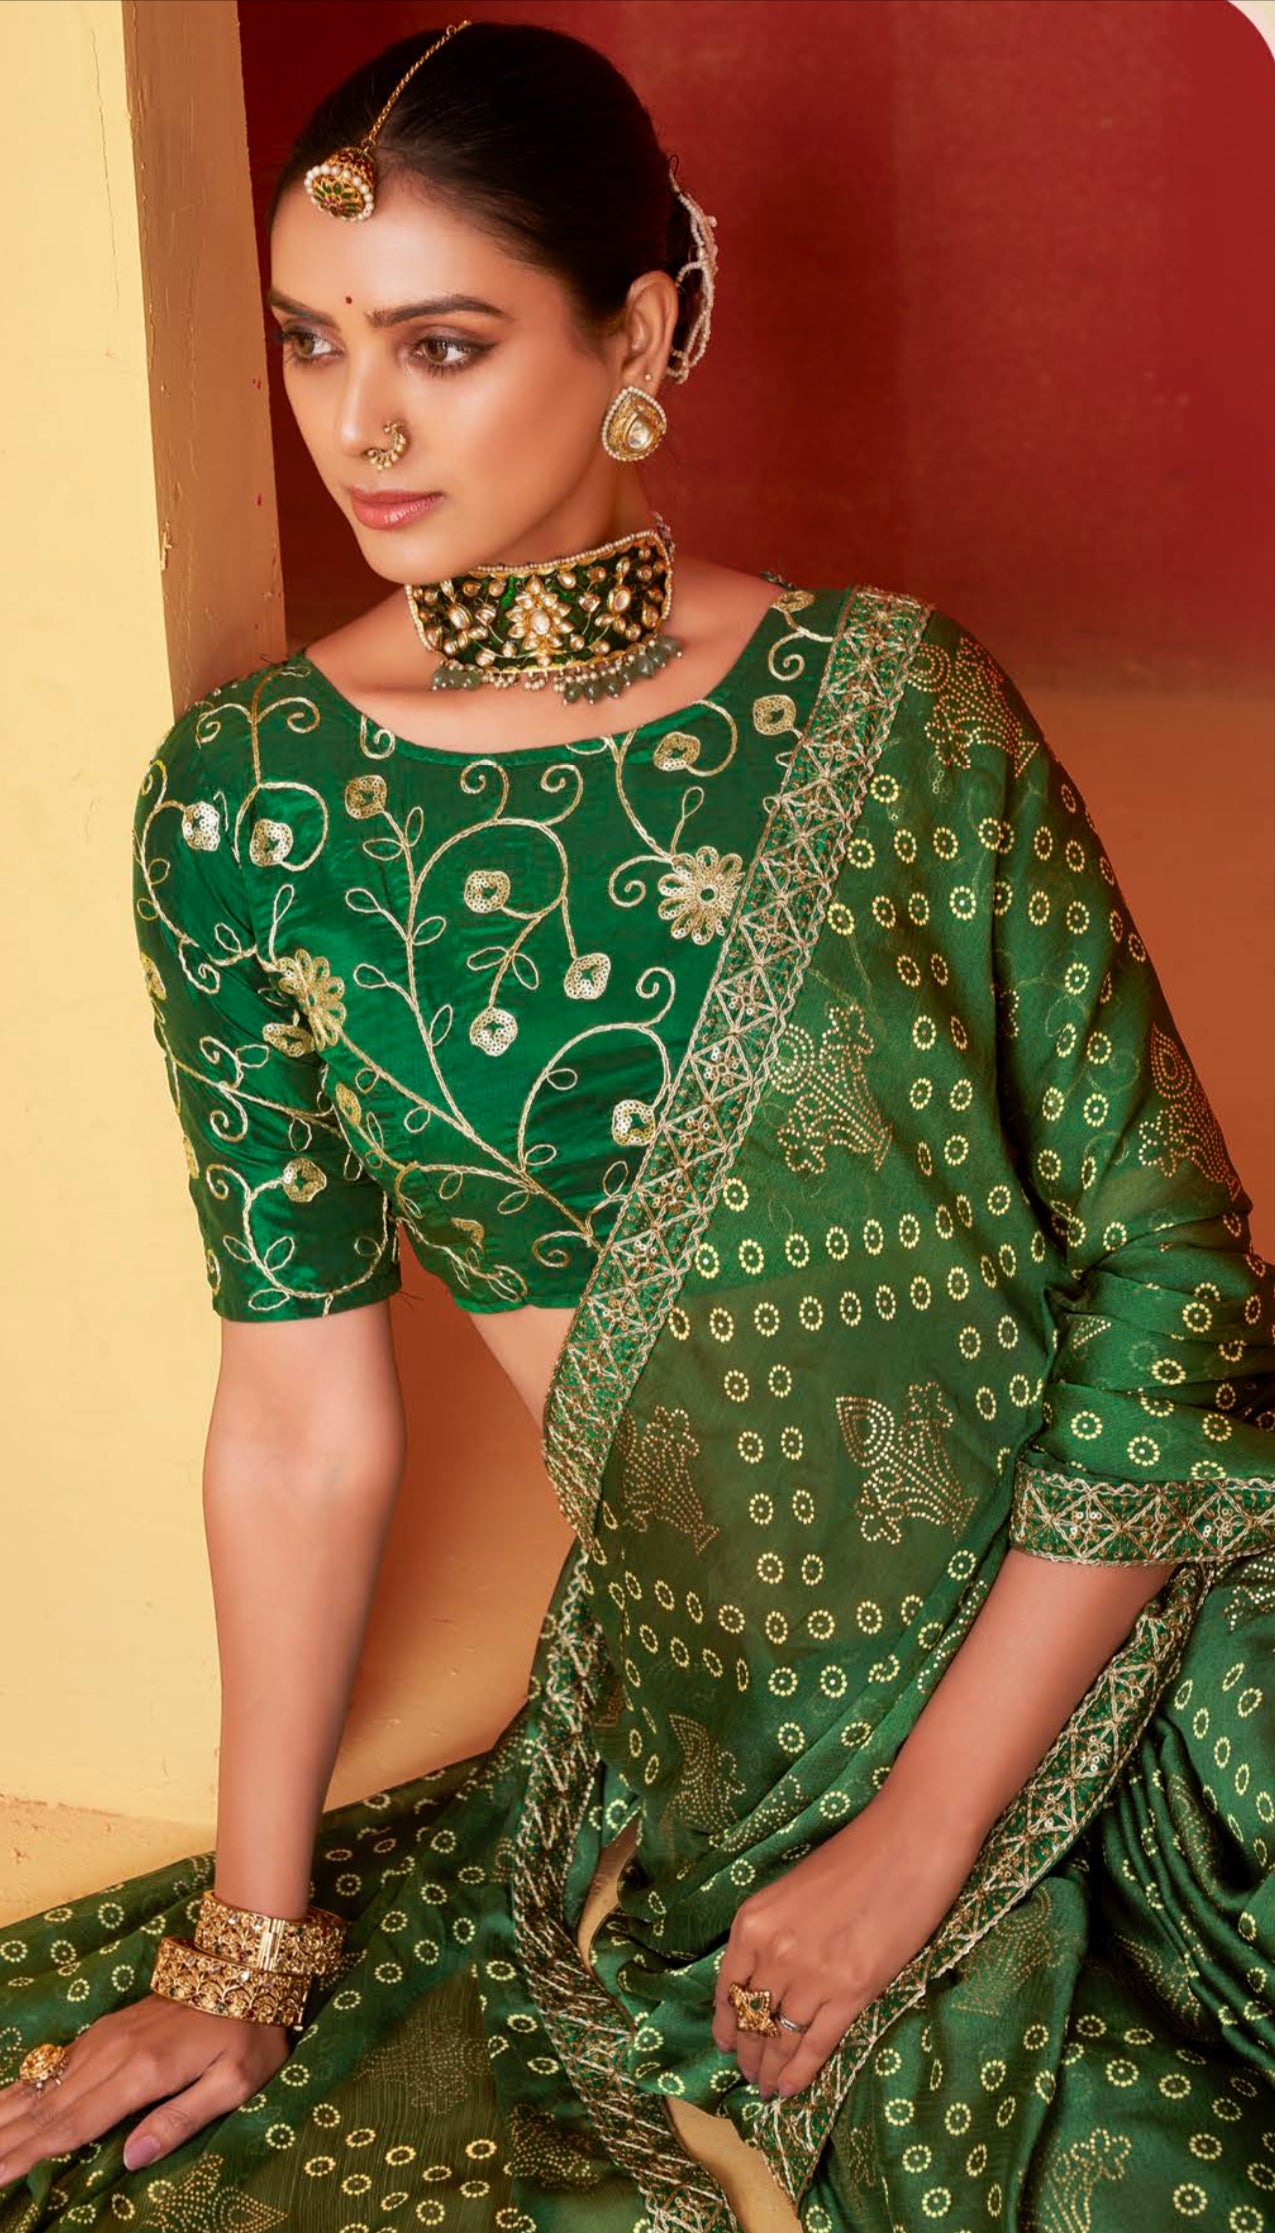 Green Moss Chiffon Foil Mill Print And Embroidery Work Border Saree With Fancy Work Blouse Sbs4